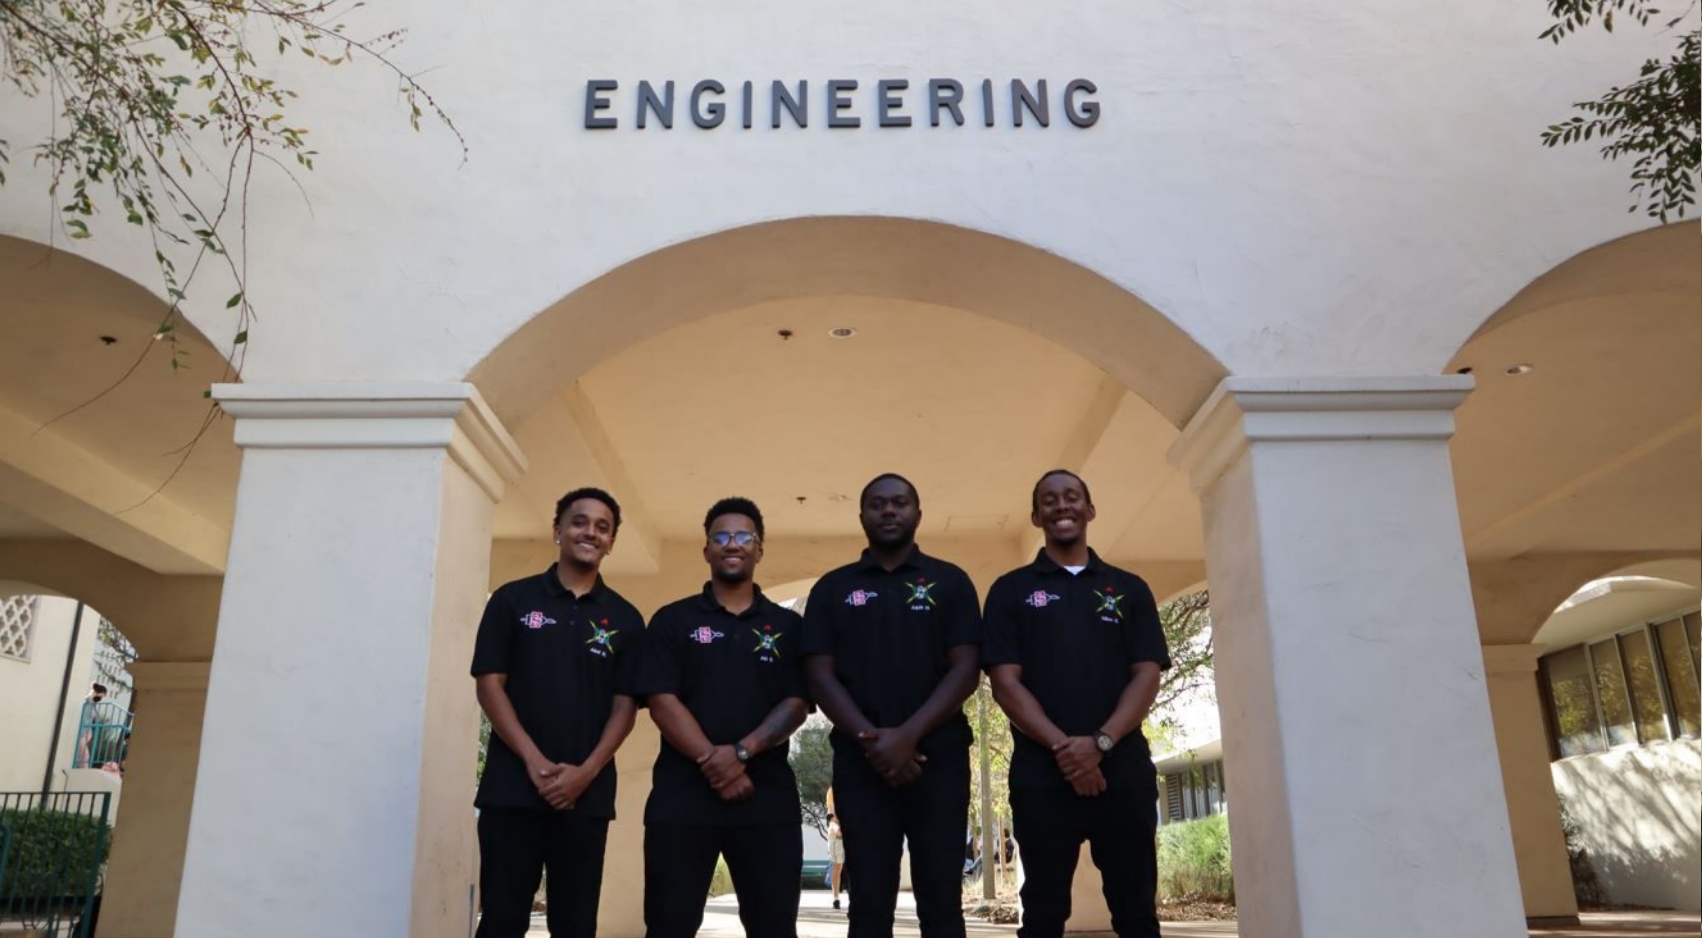 NSBE members Abel Napoleon, Abi Daniel, Aquin Manners, Miles Gordon pose outside the College of Engineering at SDSU.